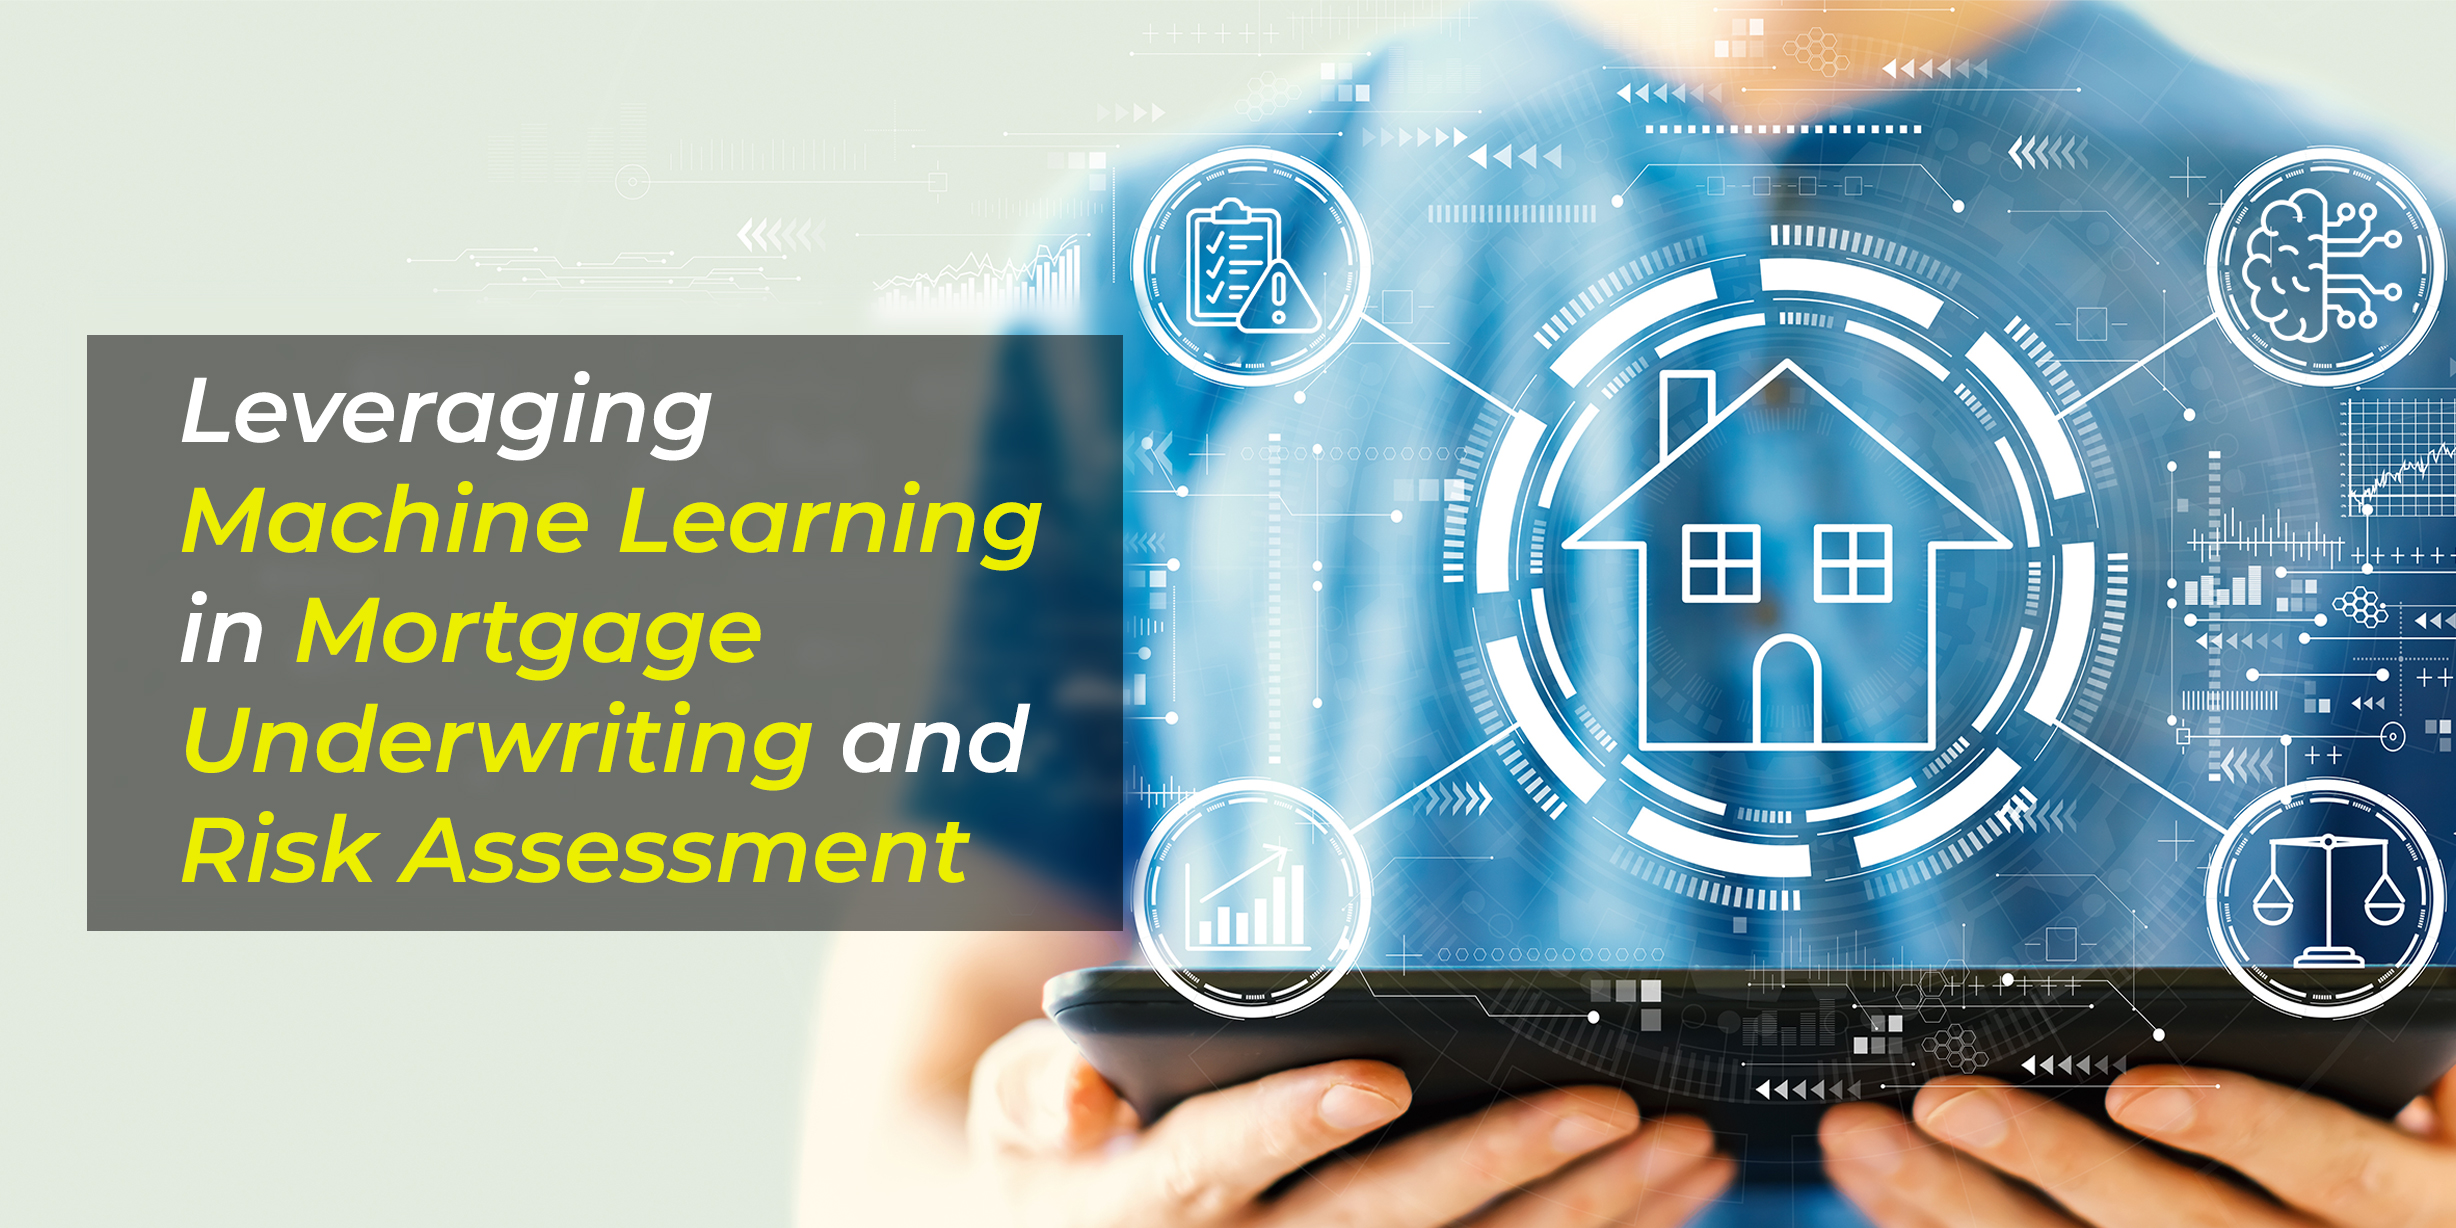 Leveraging Machine Learning in Mortgage Underwriting and Risk Assessment